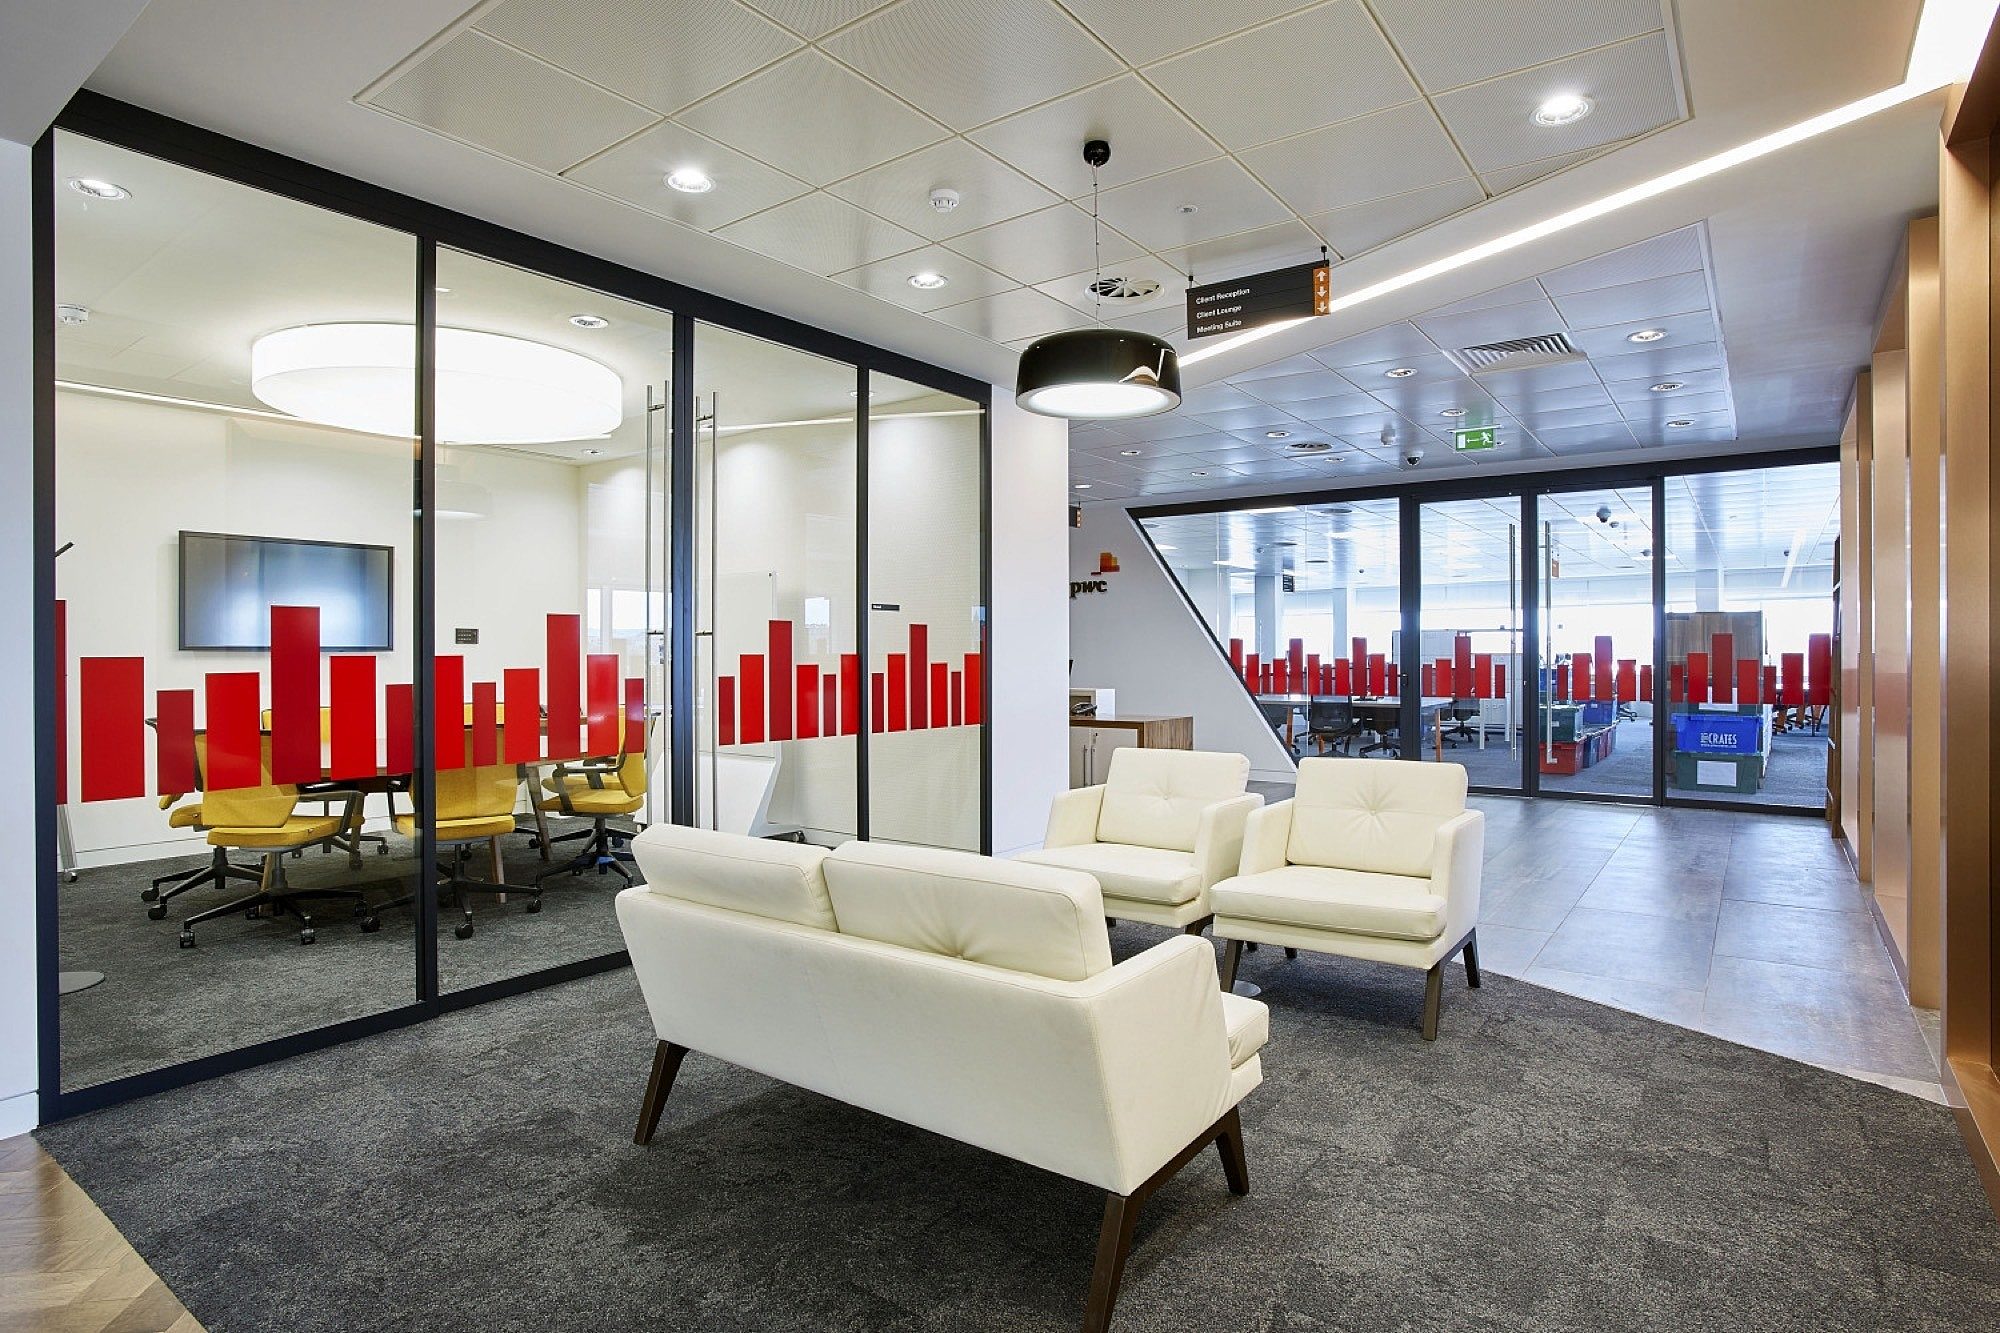 PwC white sofas in breakout space